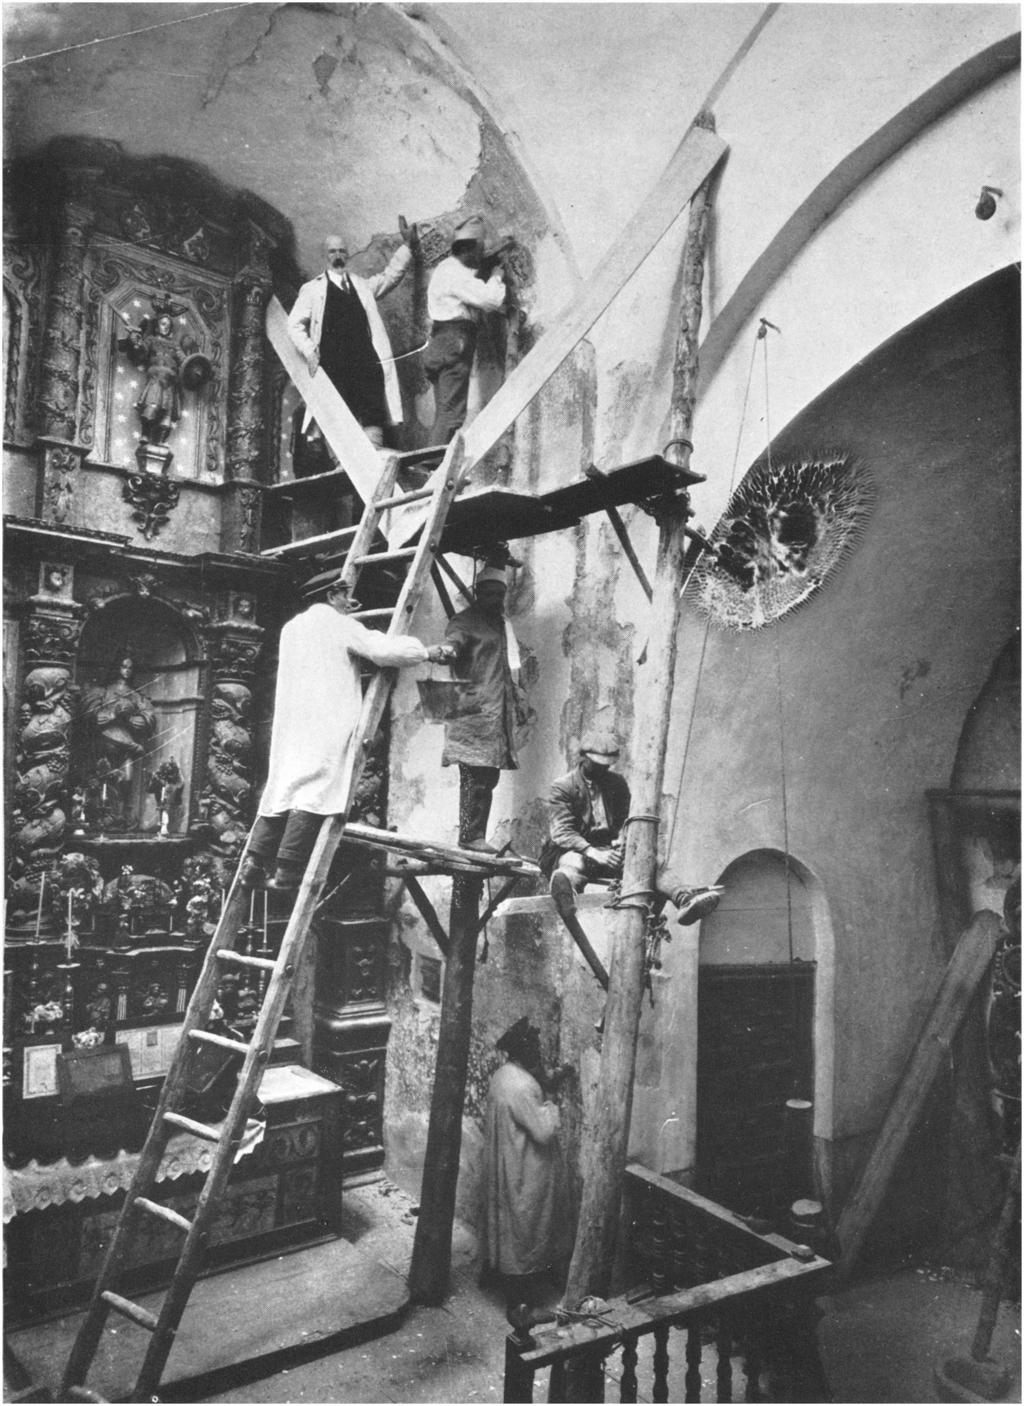 Removing frescoes from a church